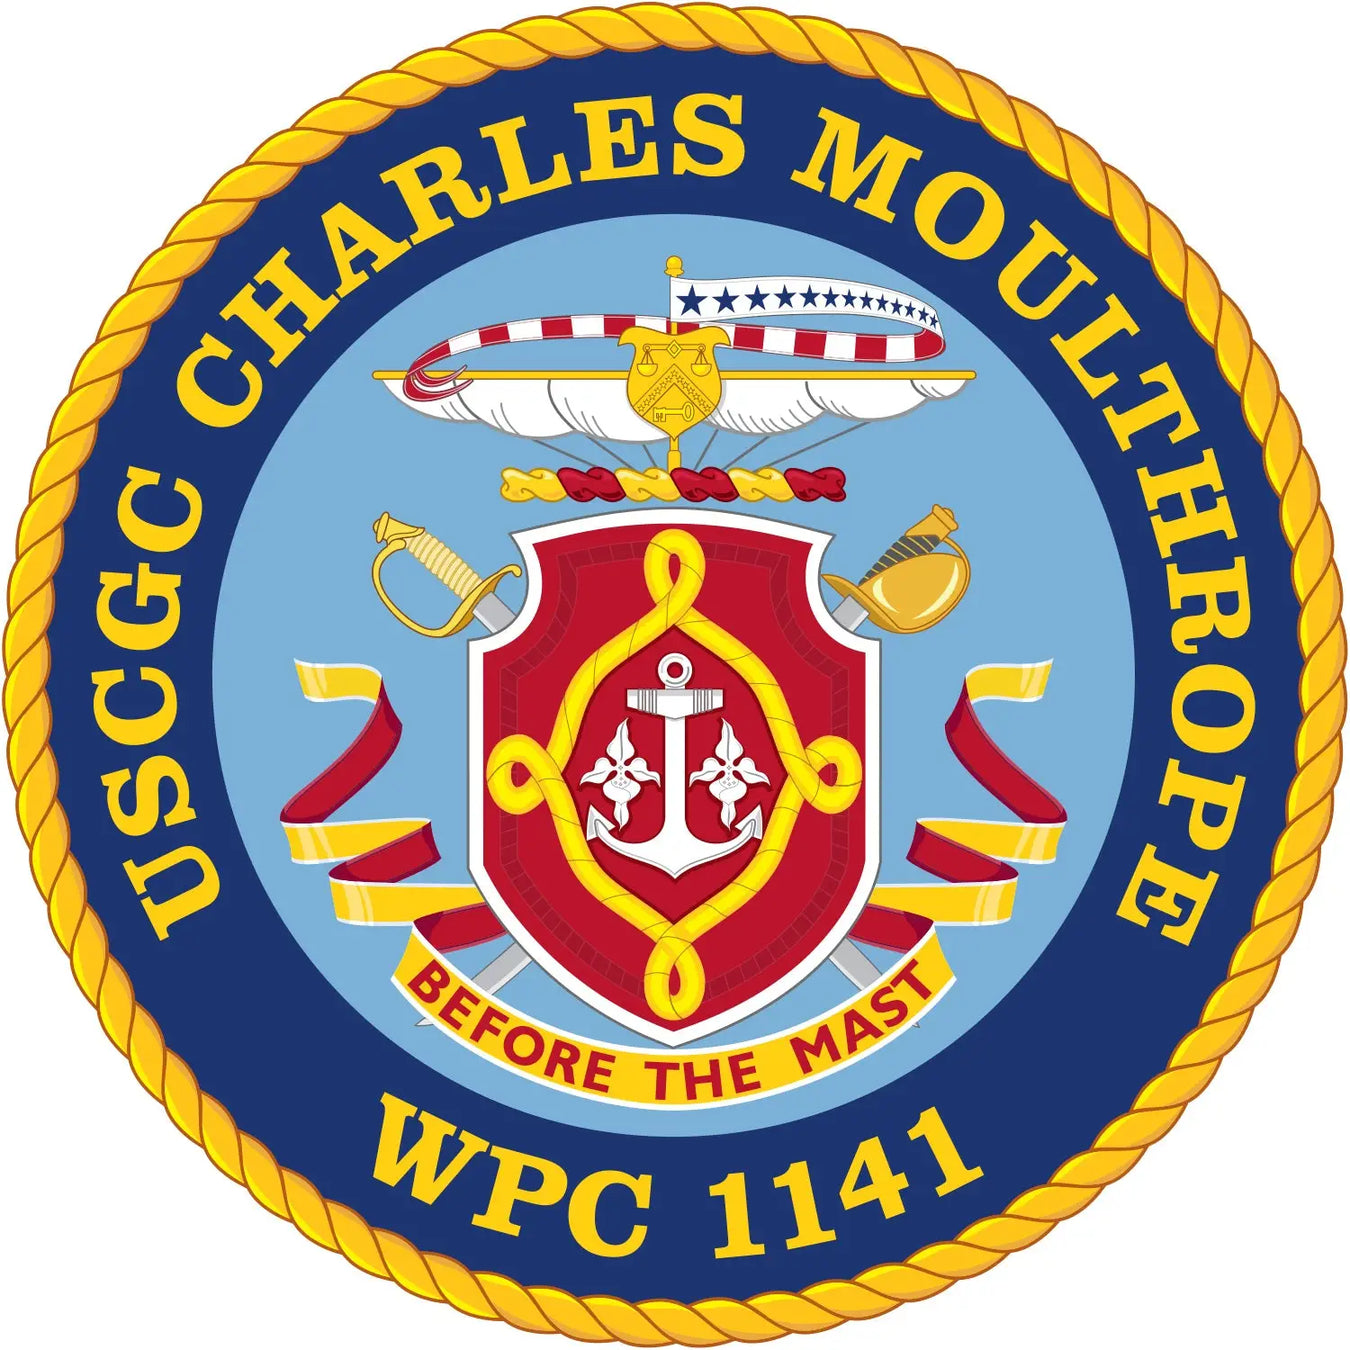 USCGC Charles Moulthrope (WPC-1141)